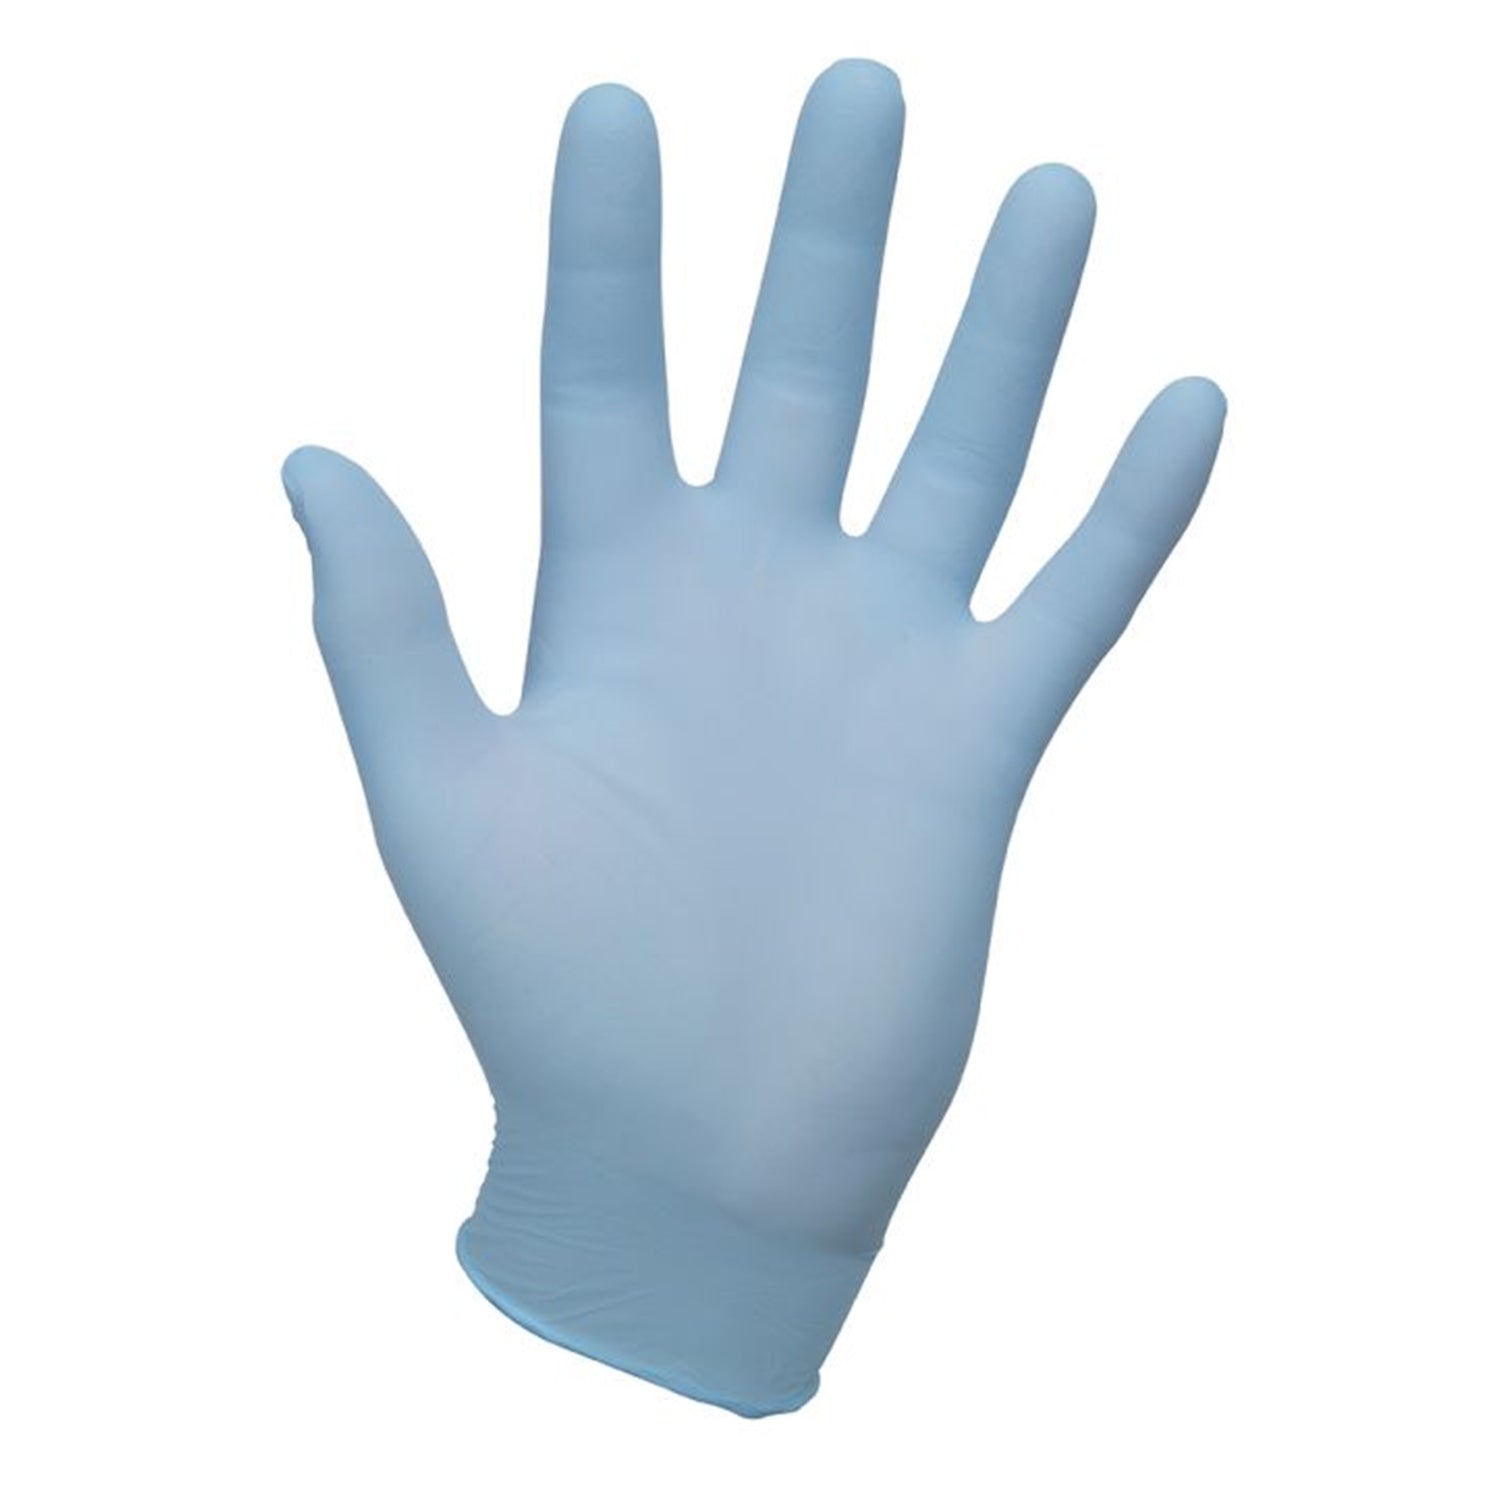 Premier AF Nitrile Examination Gloves | Sterile | Latex Free | Small | Pack of 50 Pairs